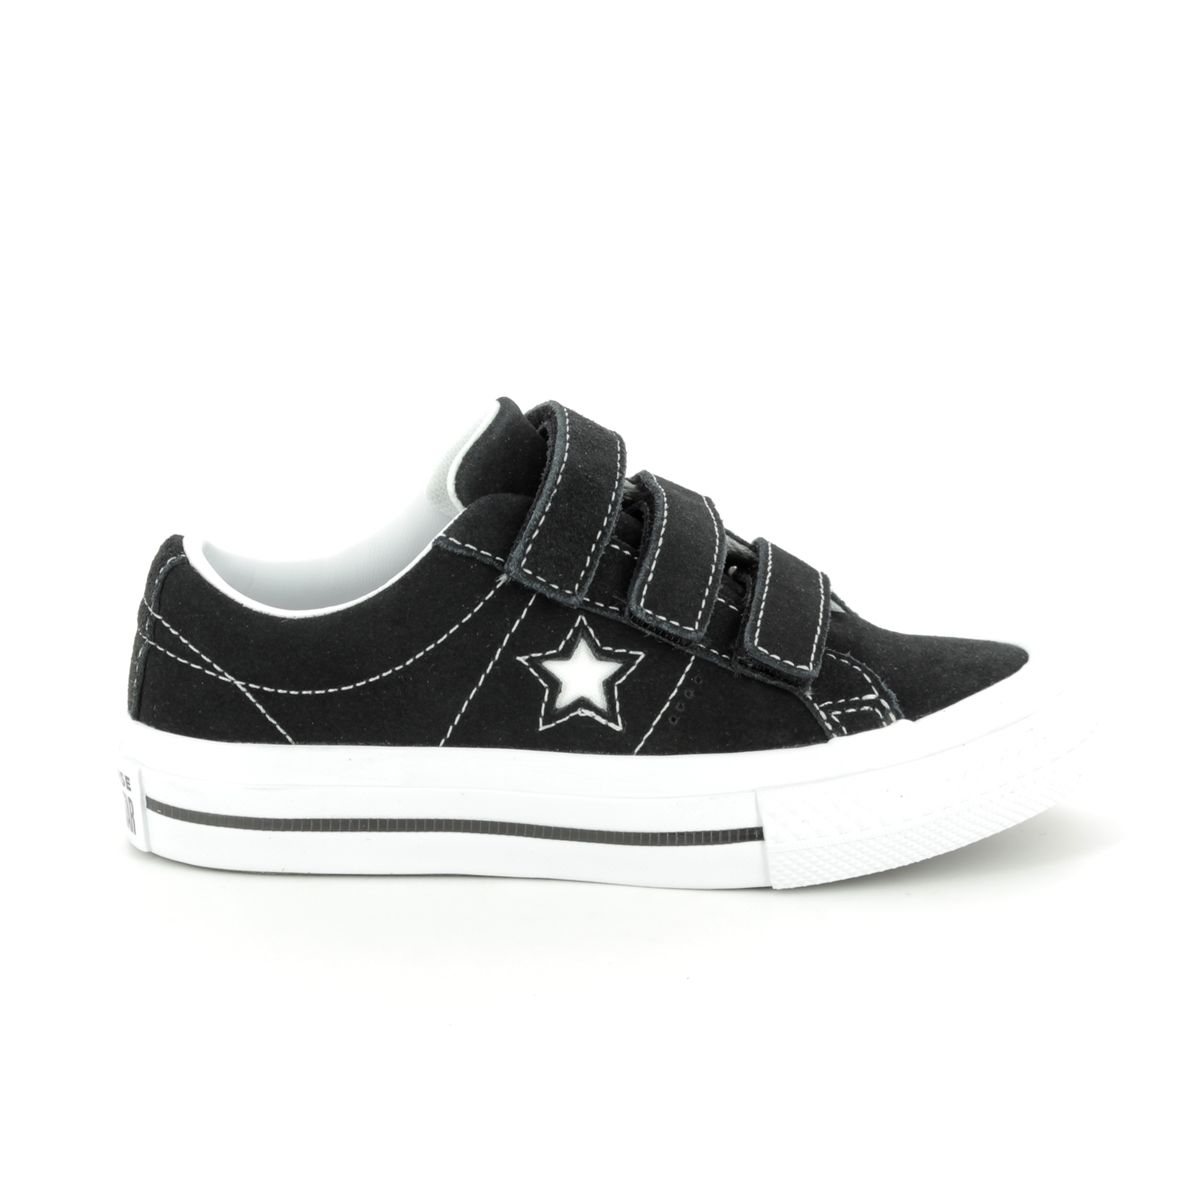 childrens velcro converse trainers